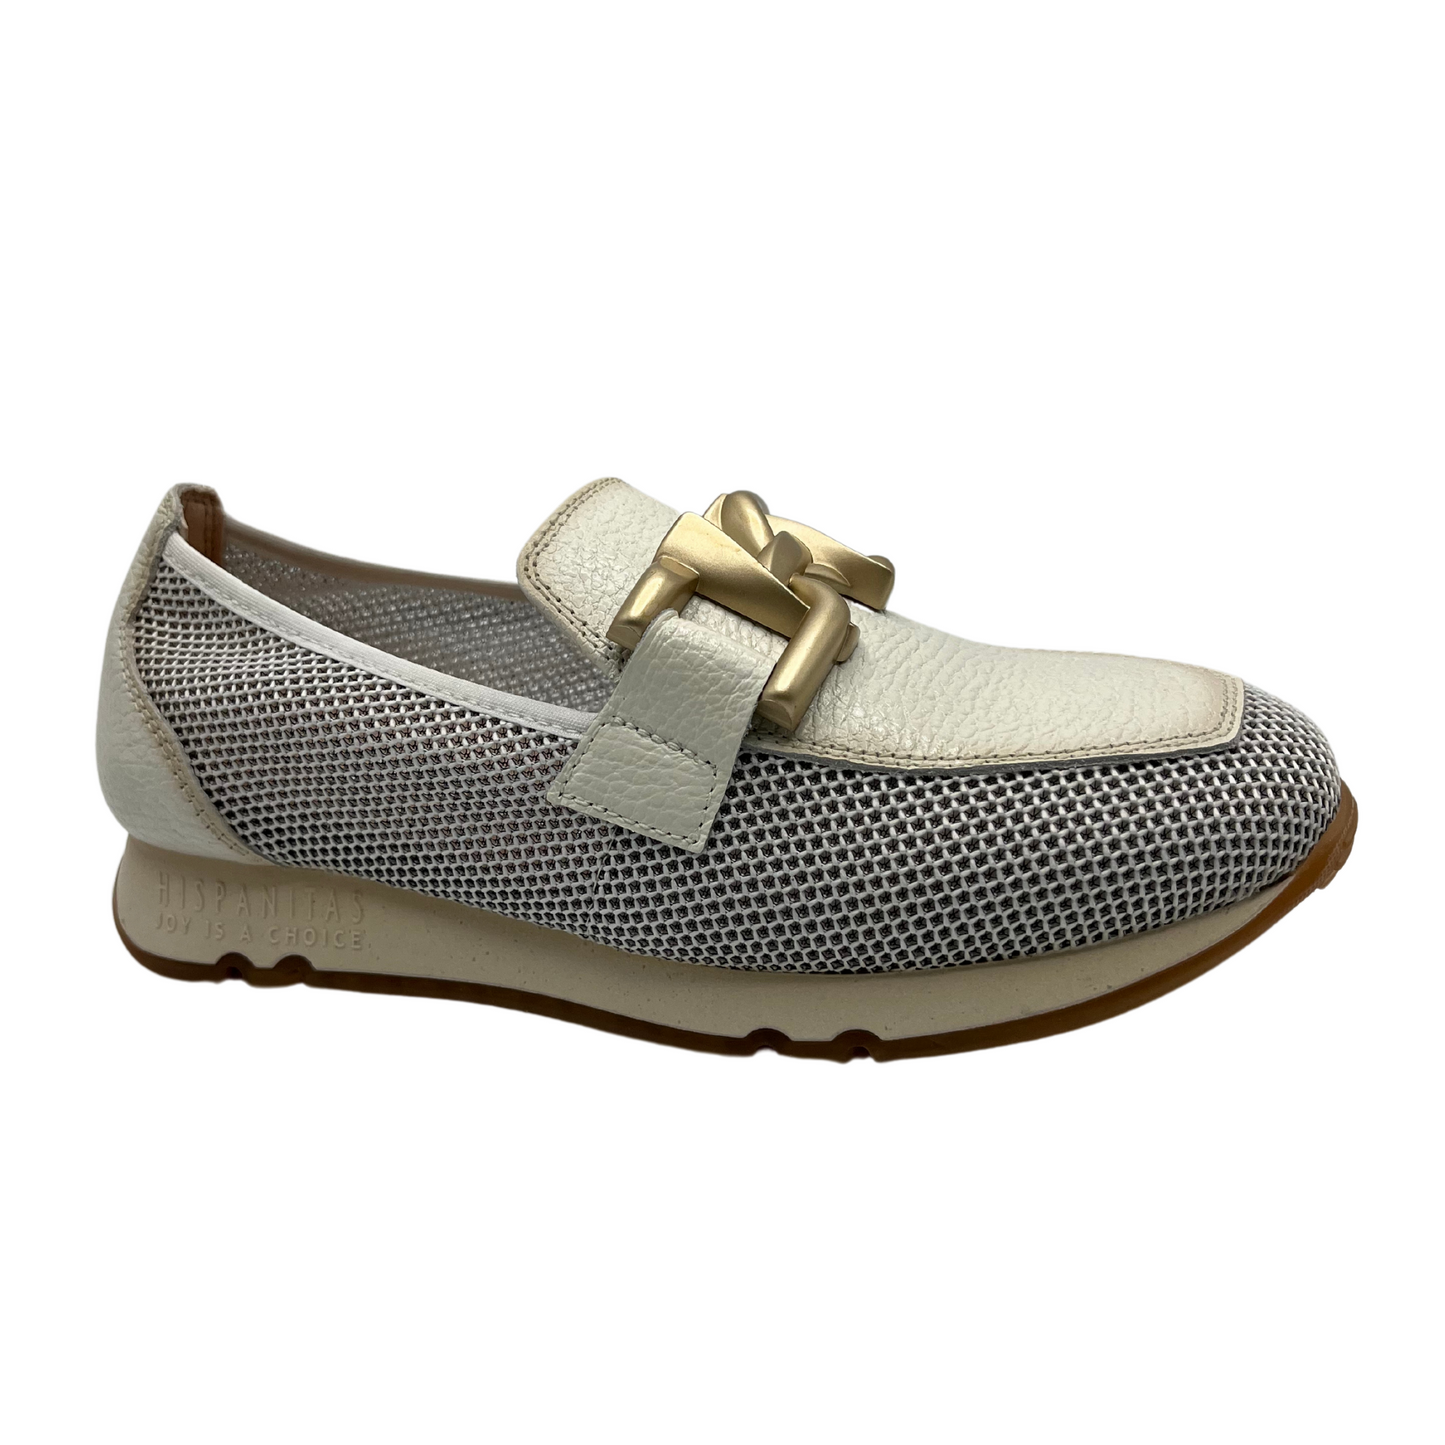 45 degree angled view of white coloured loafer sneaker with mesh sides, white rubber sole and gold detail on upper